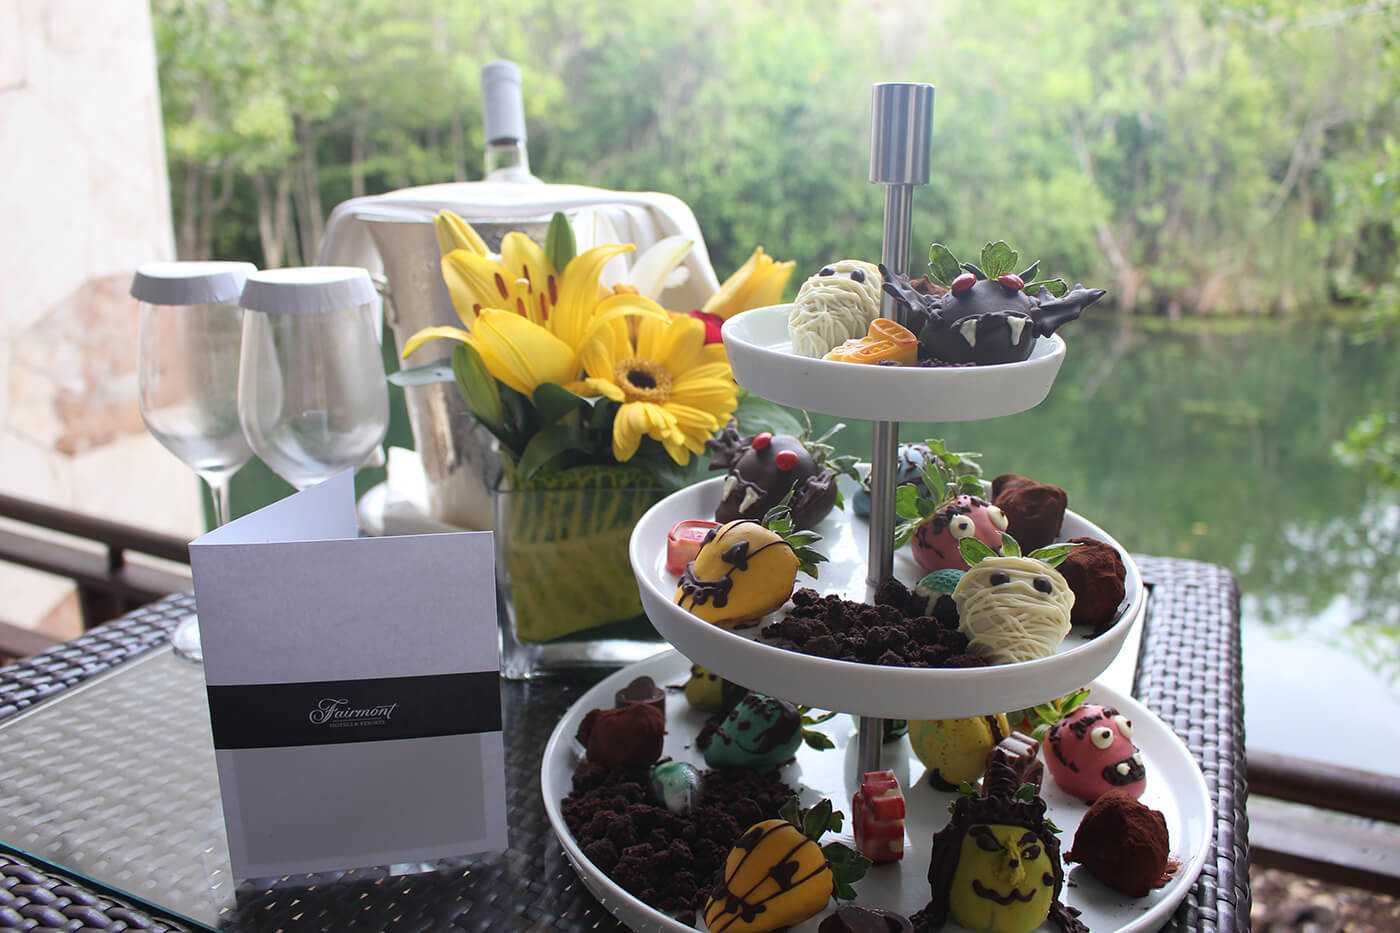 A special thanks to the Fairmont Mayakoba for an incredible stay, it was an experience that I'll remember forever. The Day of the Dead themed chocolate assortment was delightful! I can't wait for my next trip back!